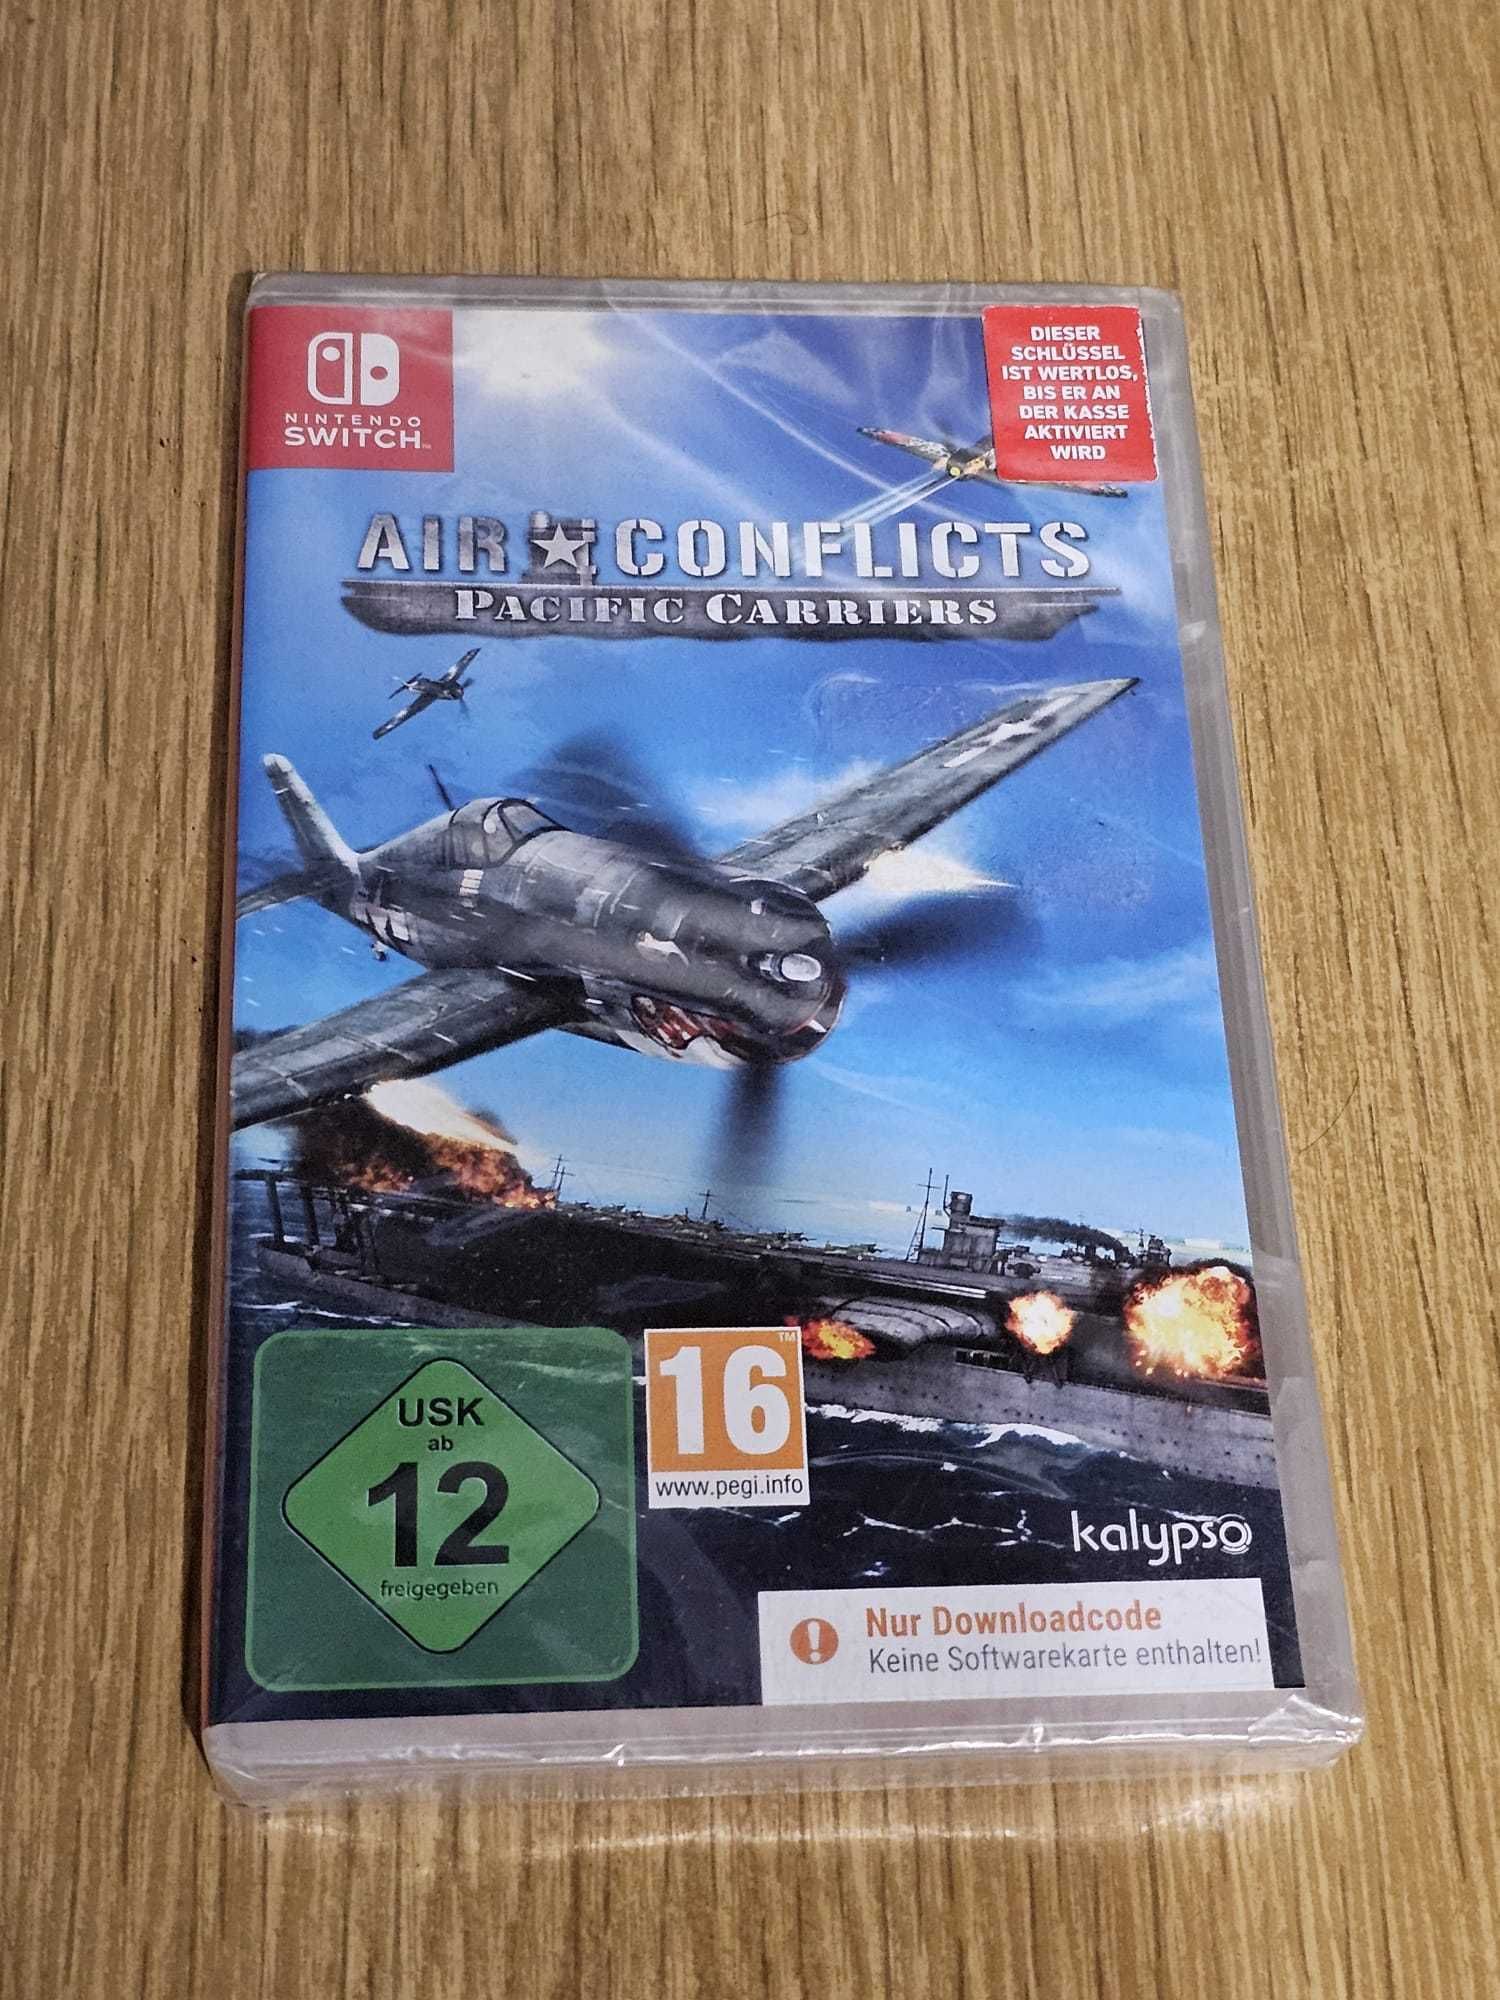 Joc Nintendo SWITCH  AIR CONFLICTS Pacific Carriers